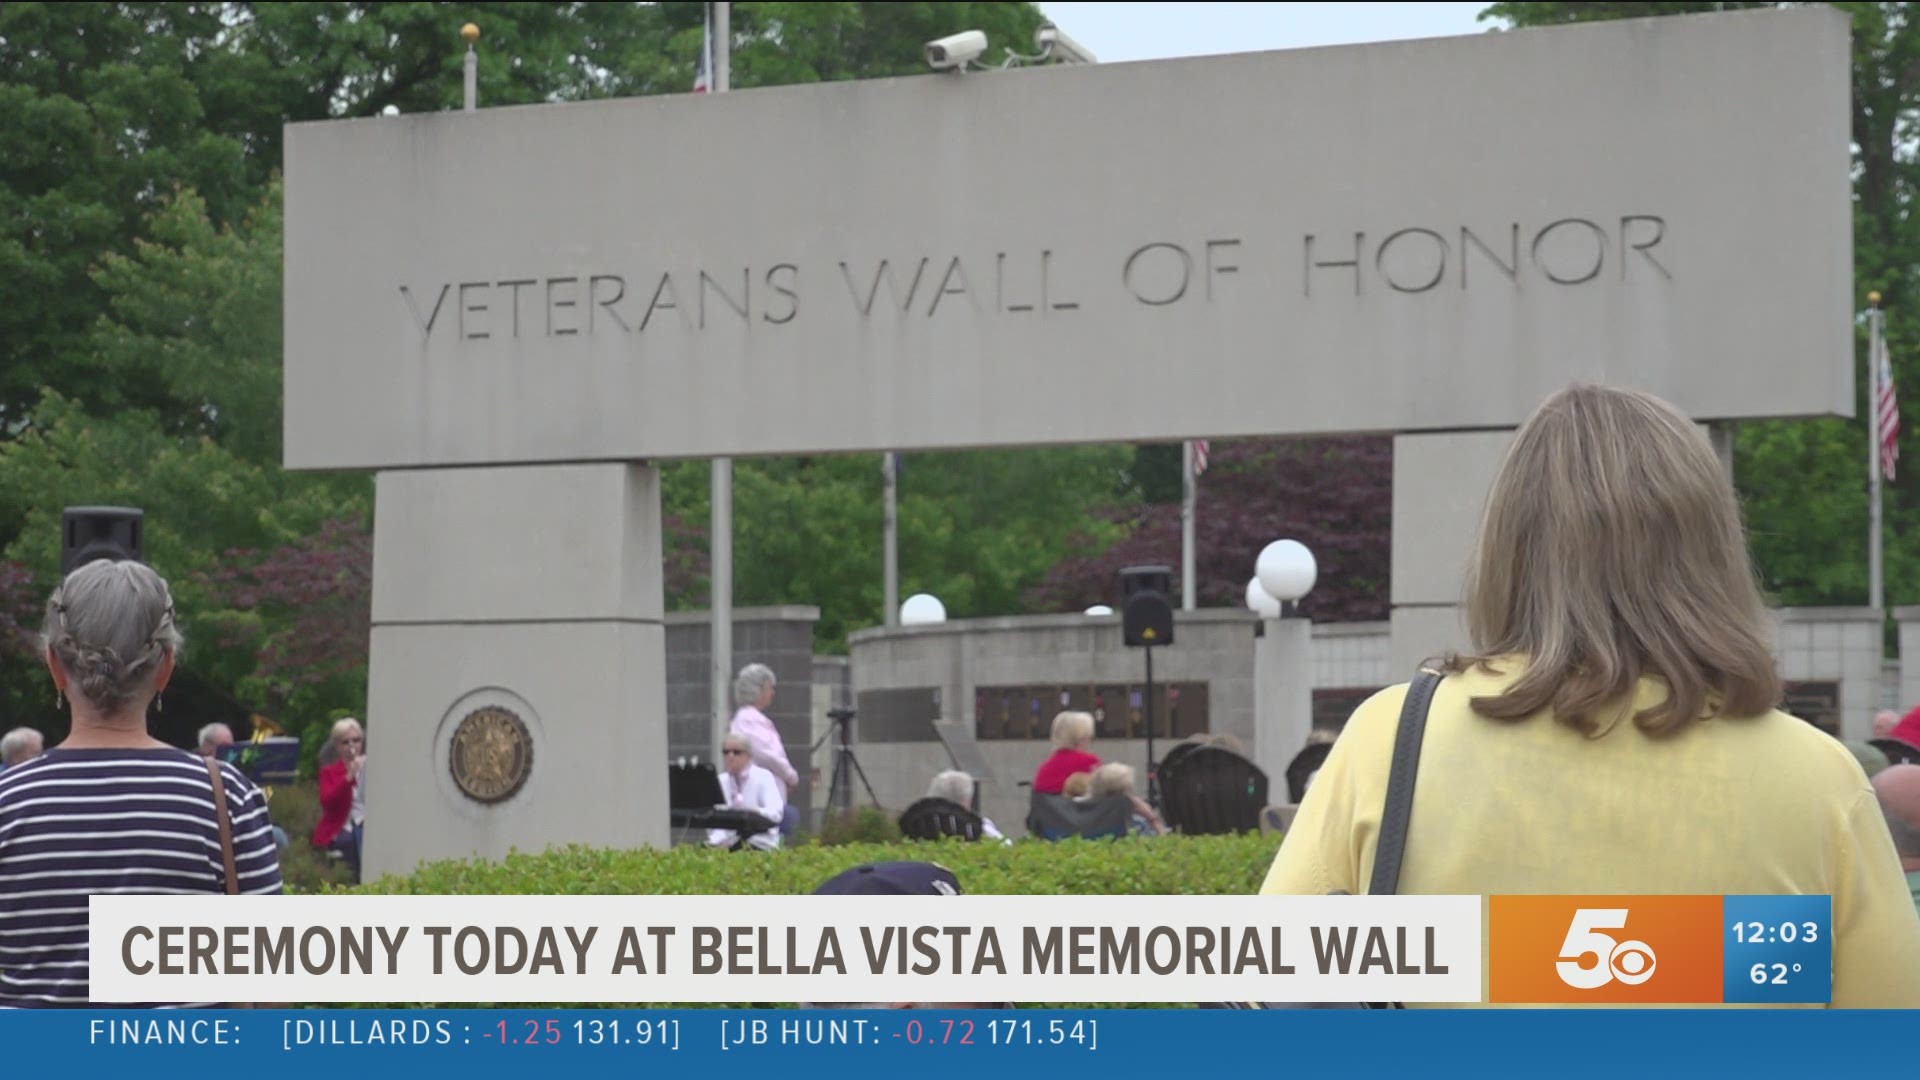 Veterans were honored today (May 31) in Bella Vista at a wall of honor.